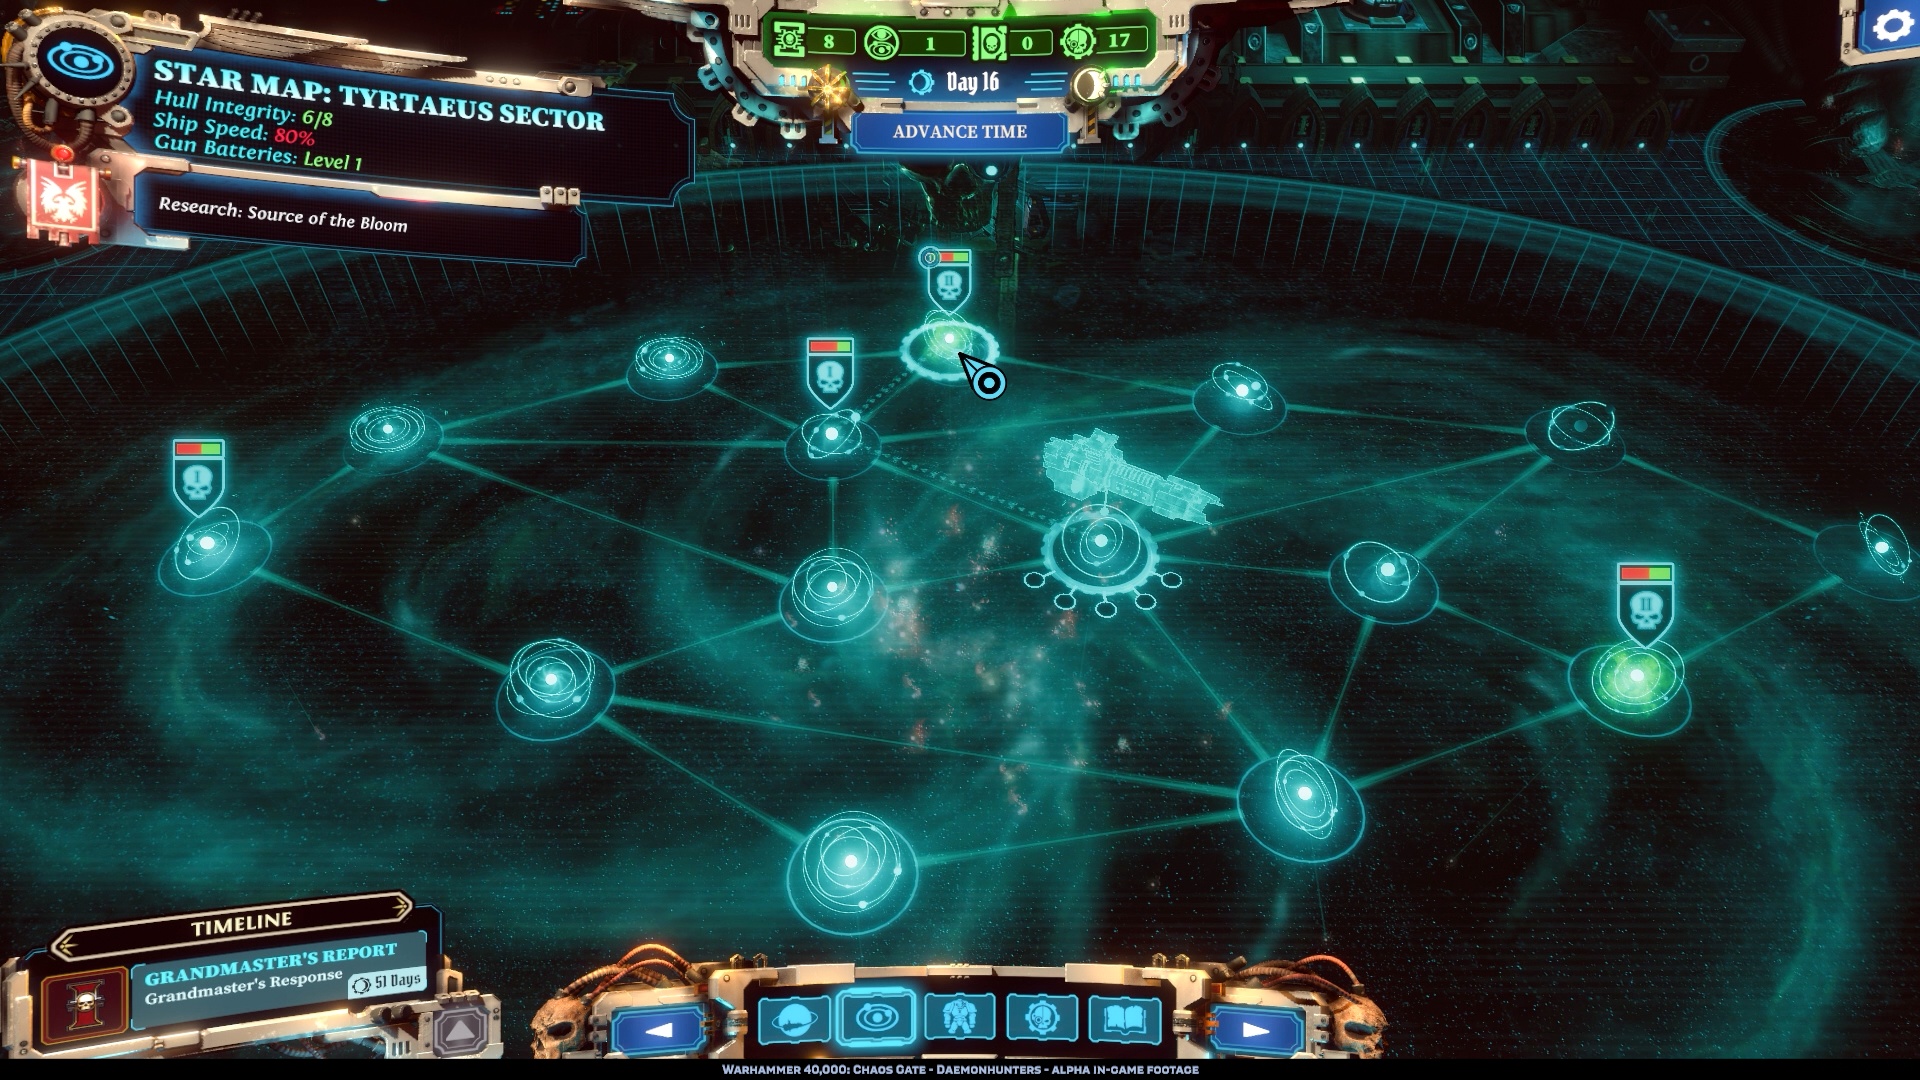 On the deck of our ship, there's a holo-map that shows the whole sector and also where the blossom is wreaking havoc.